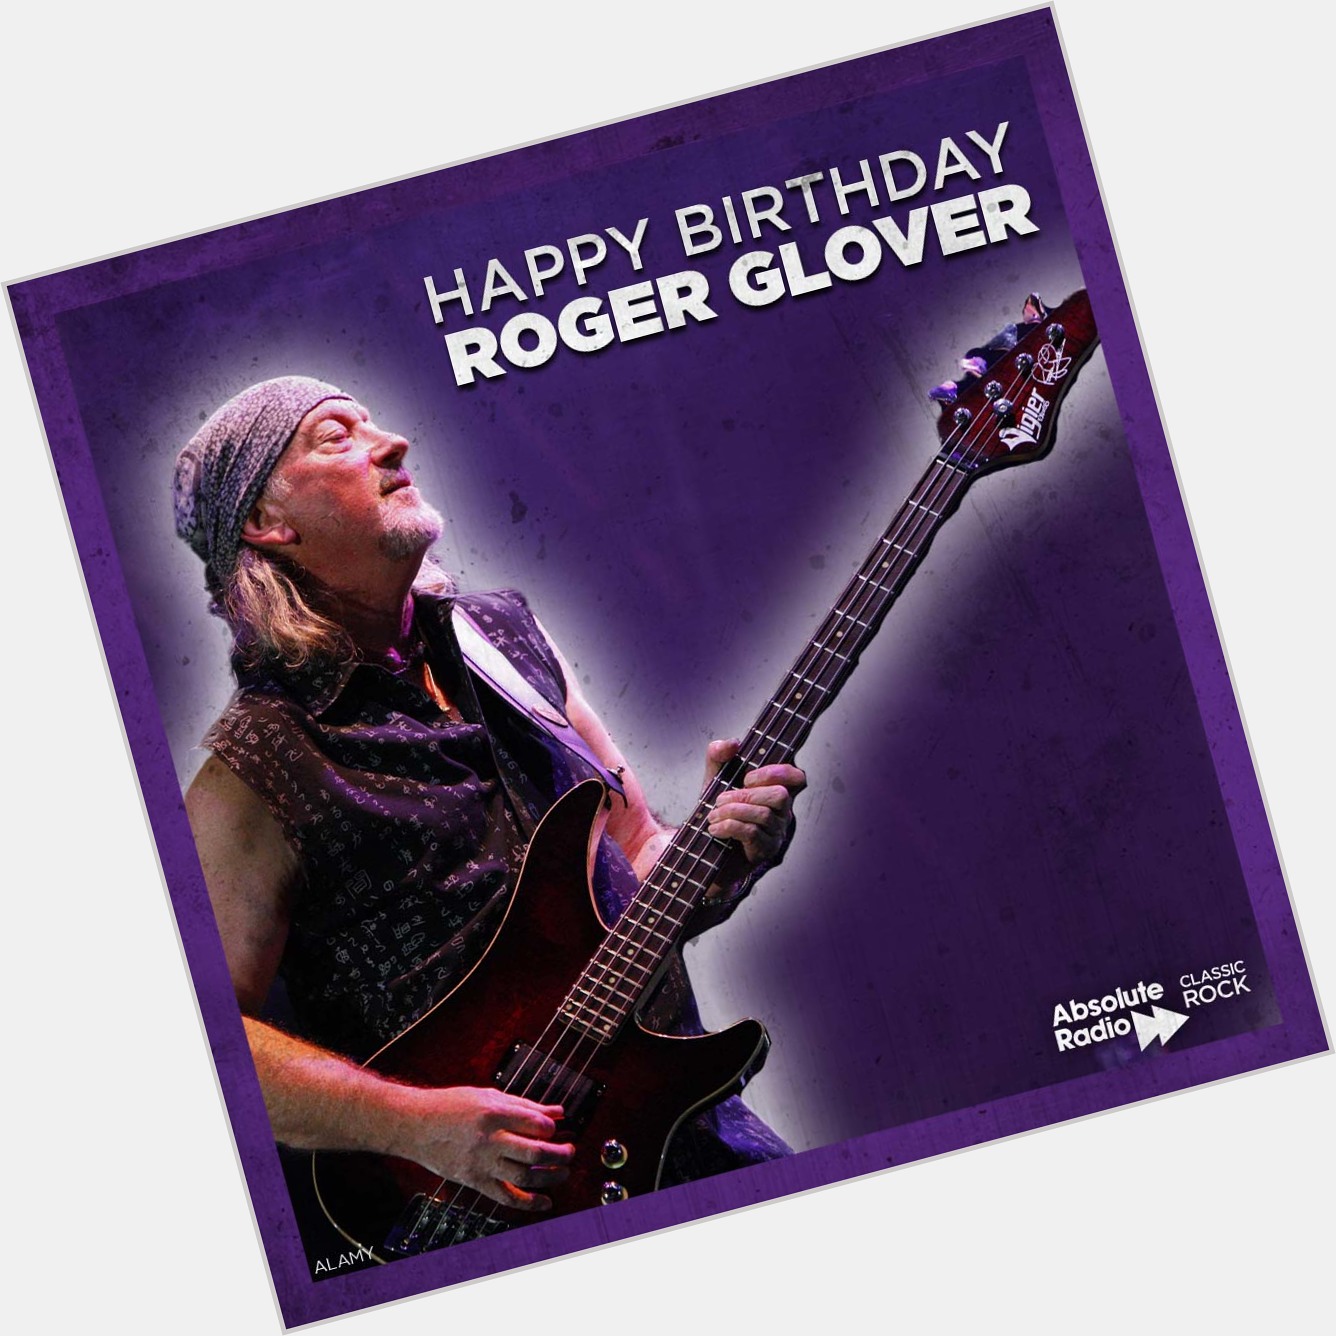 Happy birthday to bass maestro Roger Glover who turns 76 today! 